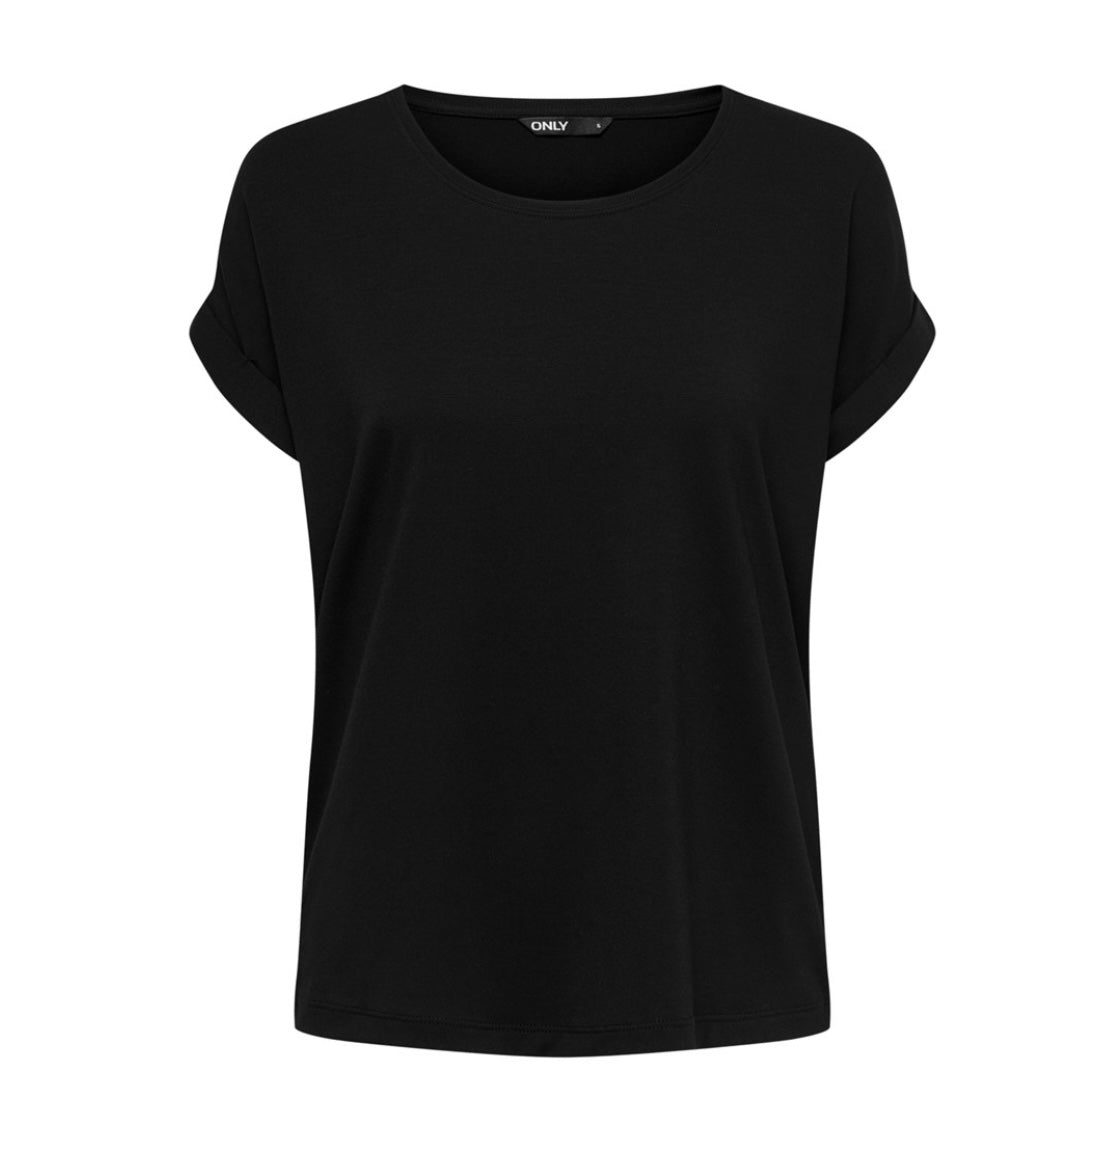 MOSTER O-NECK TOP - BLACK/SOLID BLAC